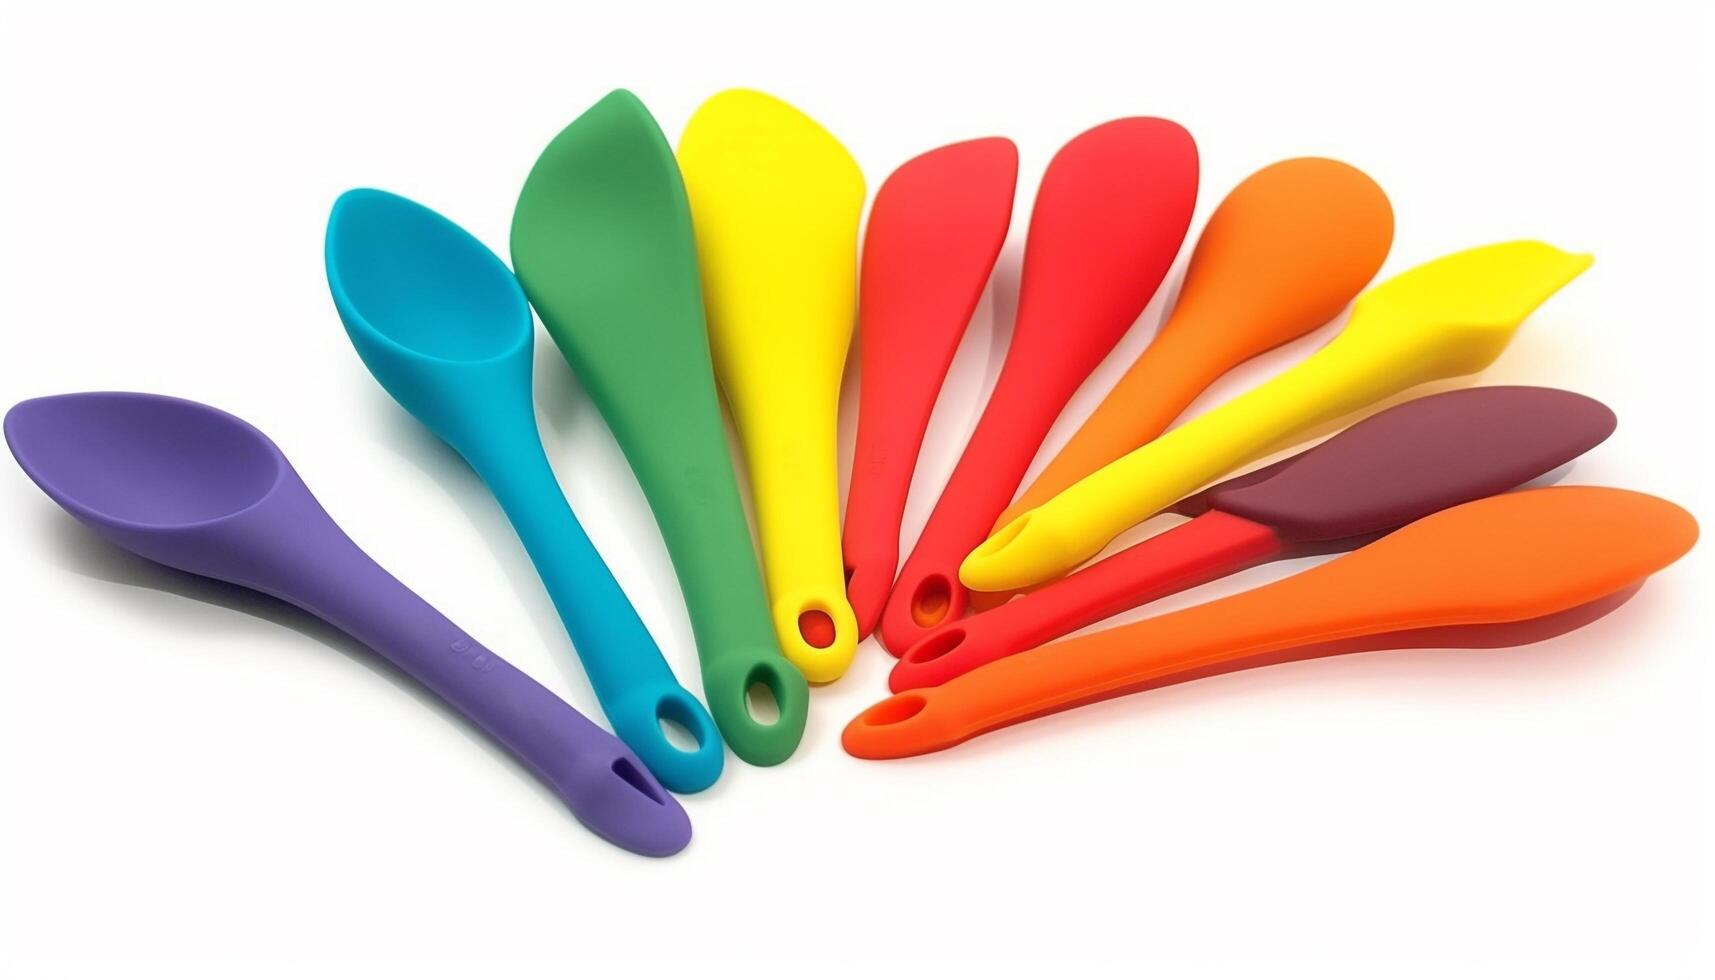 A vibrant collection of colorful plastic spoons for cooking fun generated by AI photo